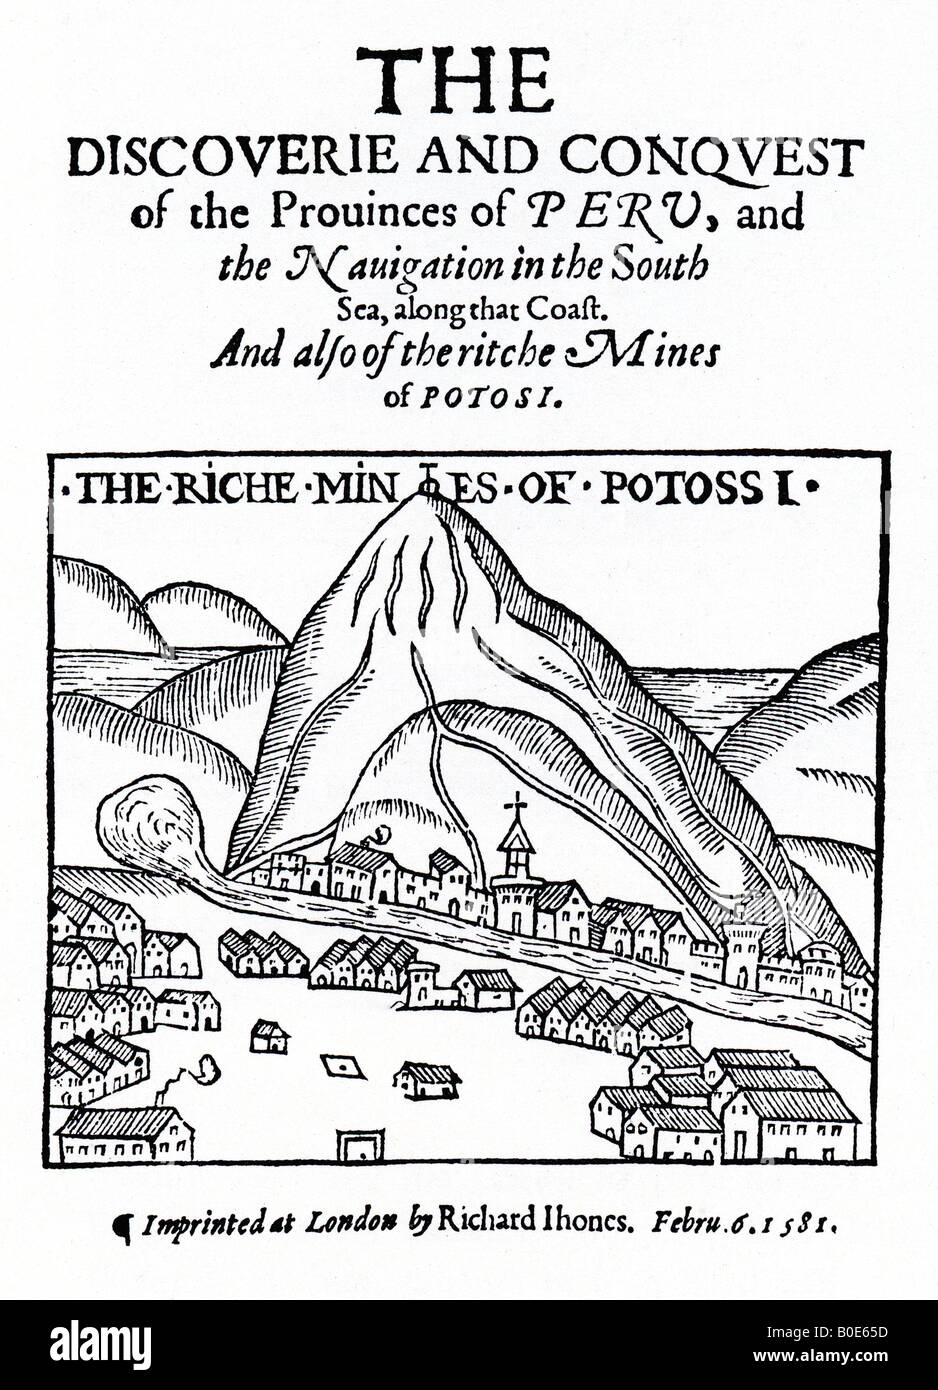 THE DISCOVERY AND CONQUEST OF THE PROVINCES OF PERU published in February 1581 with a picture of the silver rich town of Potossi Stock Photo